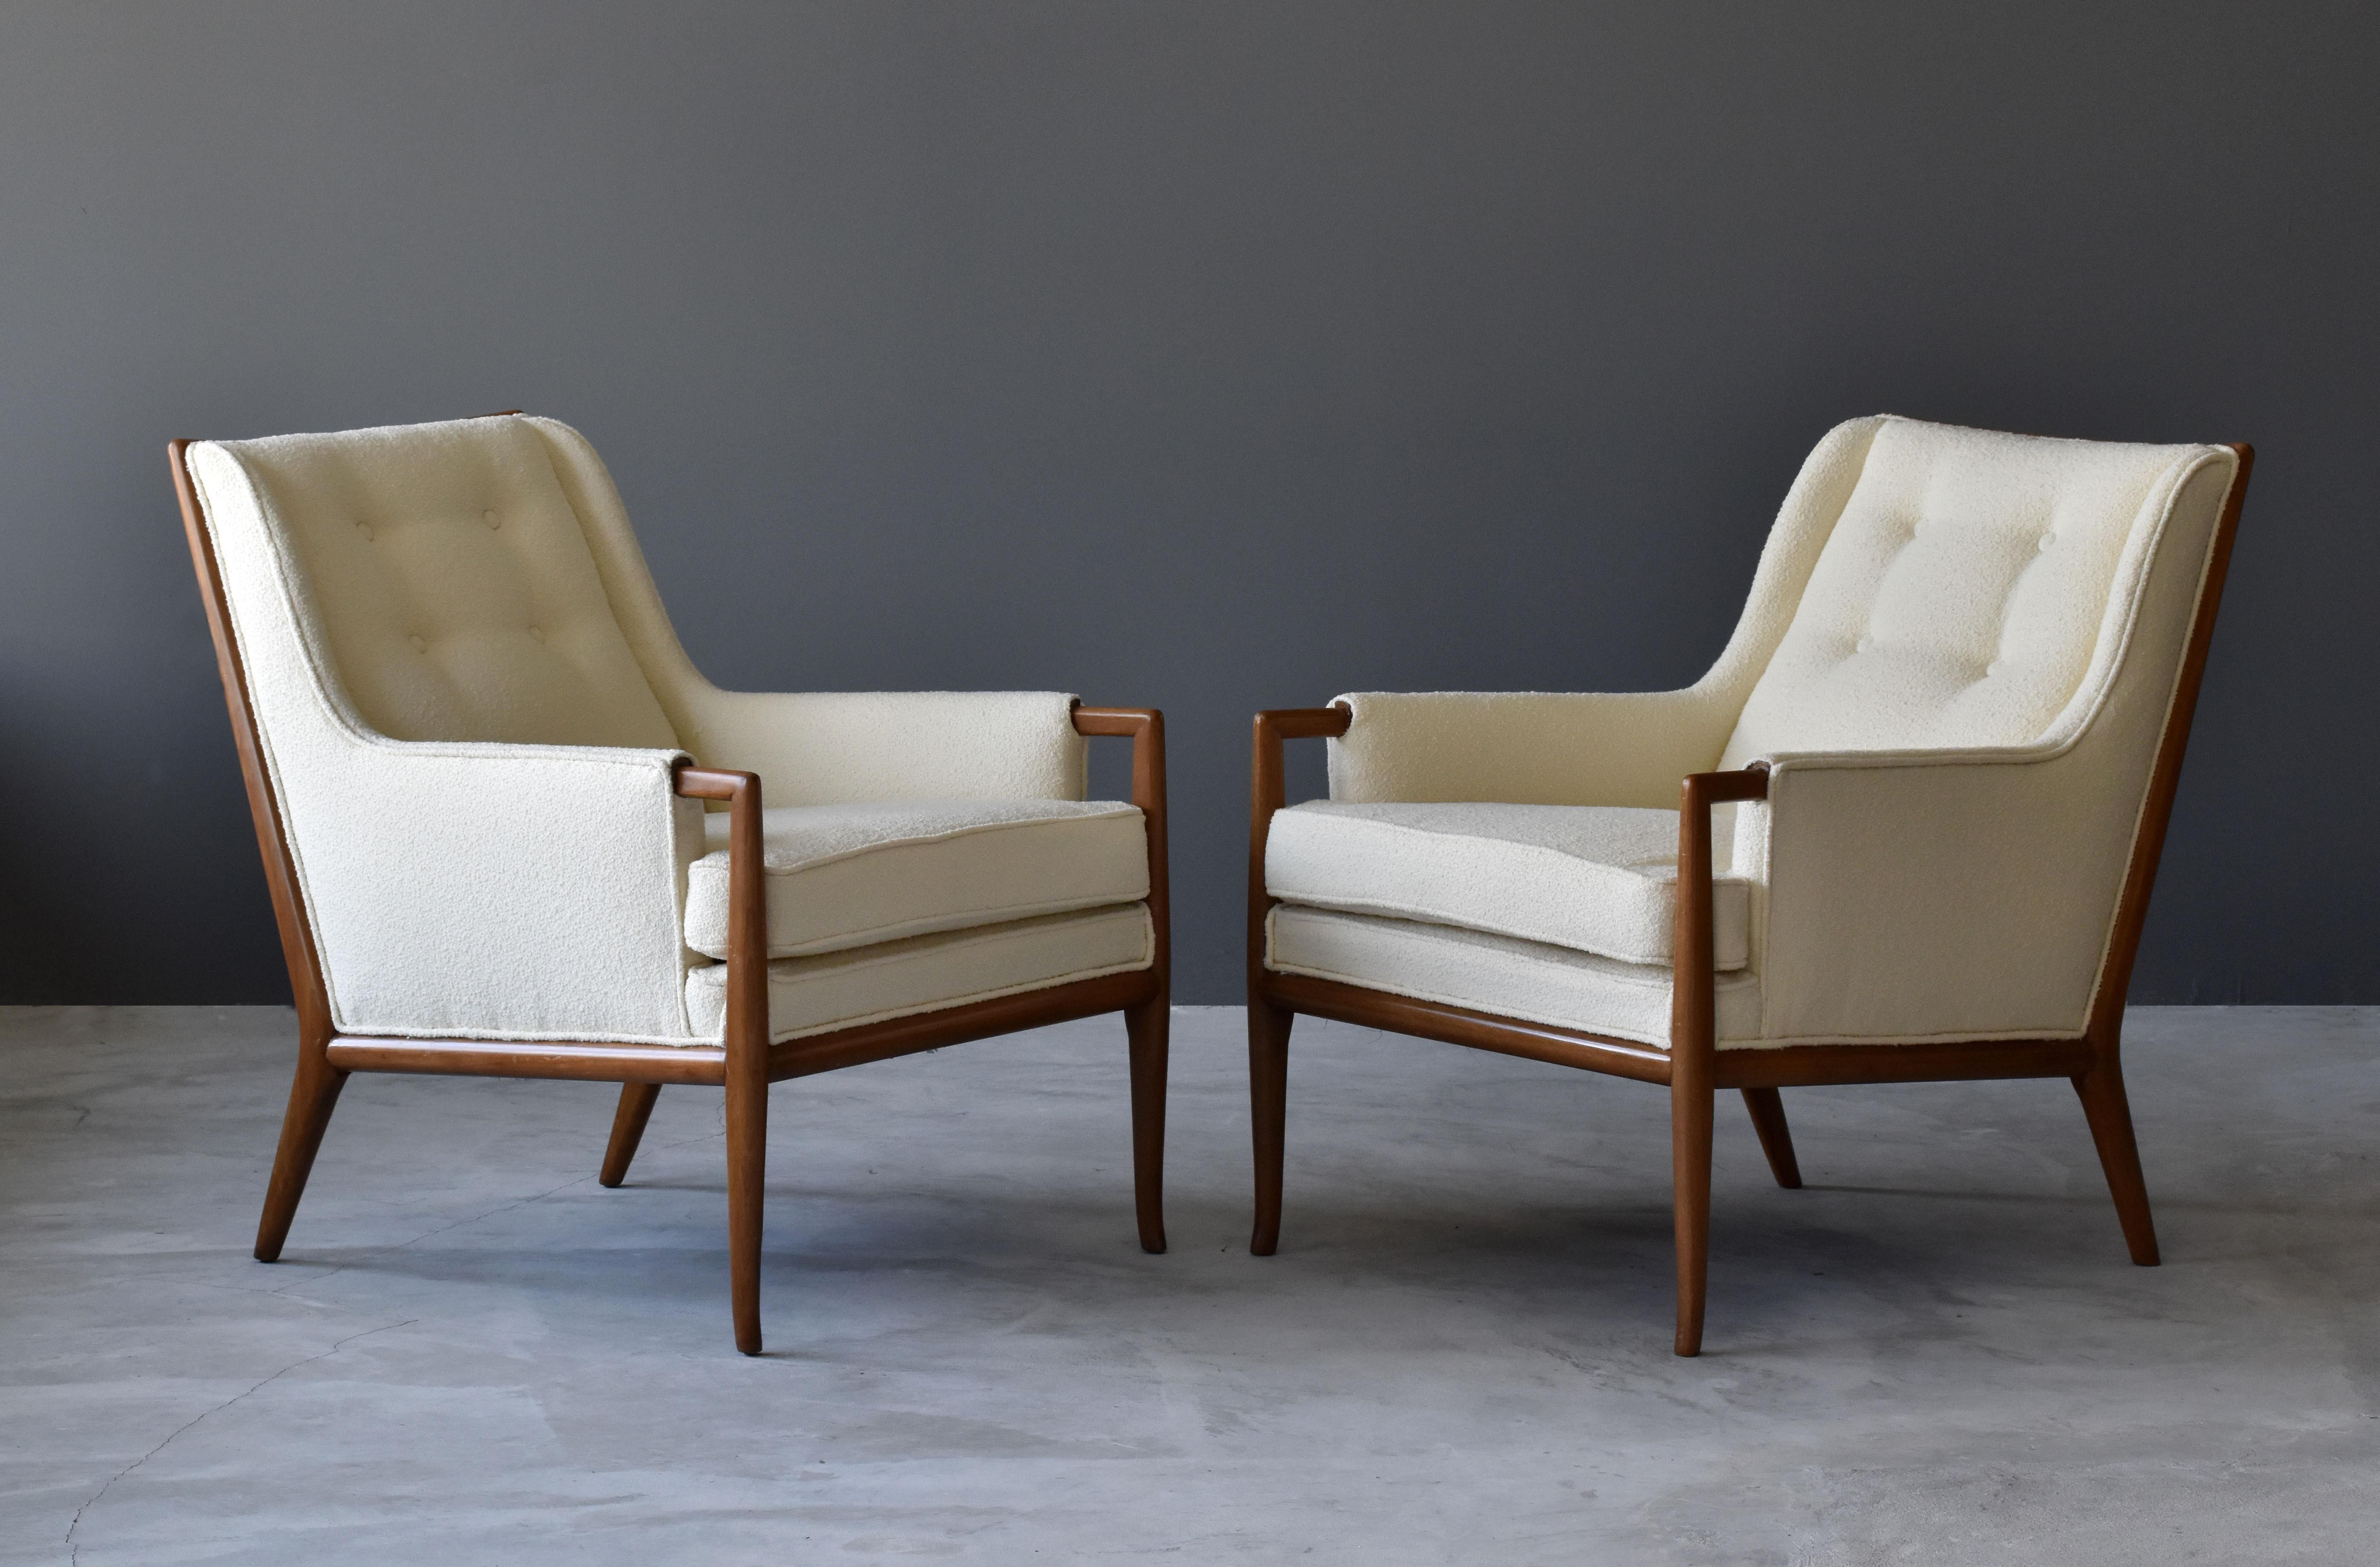 A pair of rare lounge chairs designed by T.H. Robsjohn-Gibbings. Produced by Widdicomb Furniture Company in Grand Rapids, Michigan, circa 1950s.

Other American designers of this era are Edward Wormley, George Nakashima, Tommi Parzinger, Paul